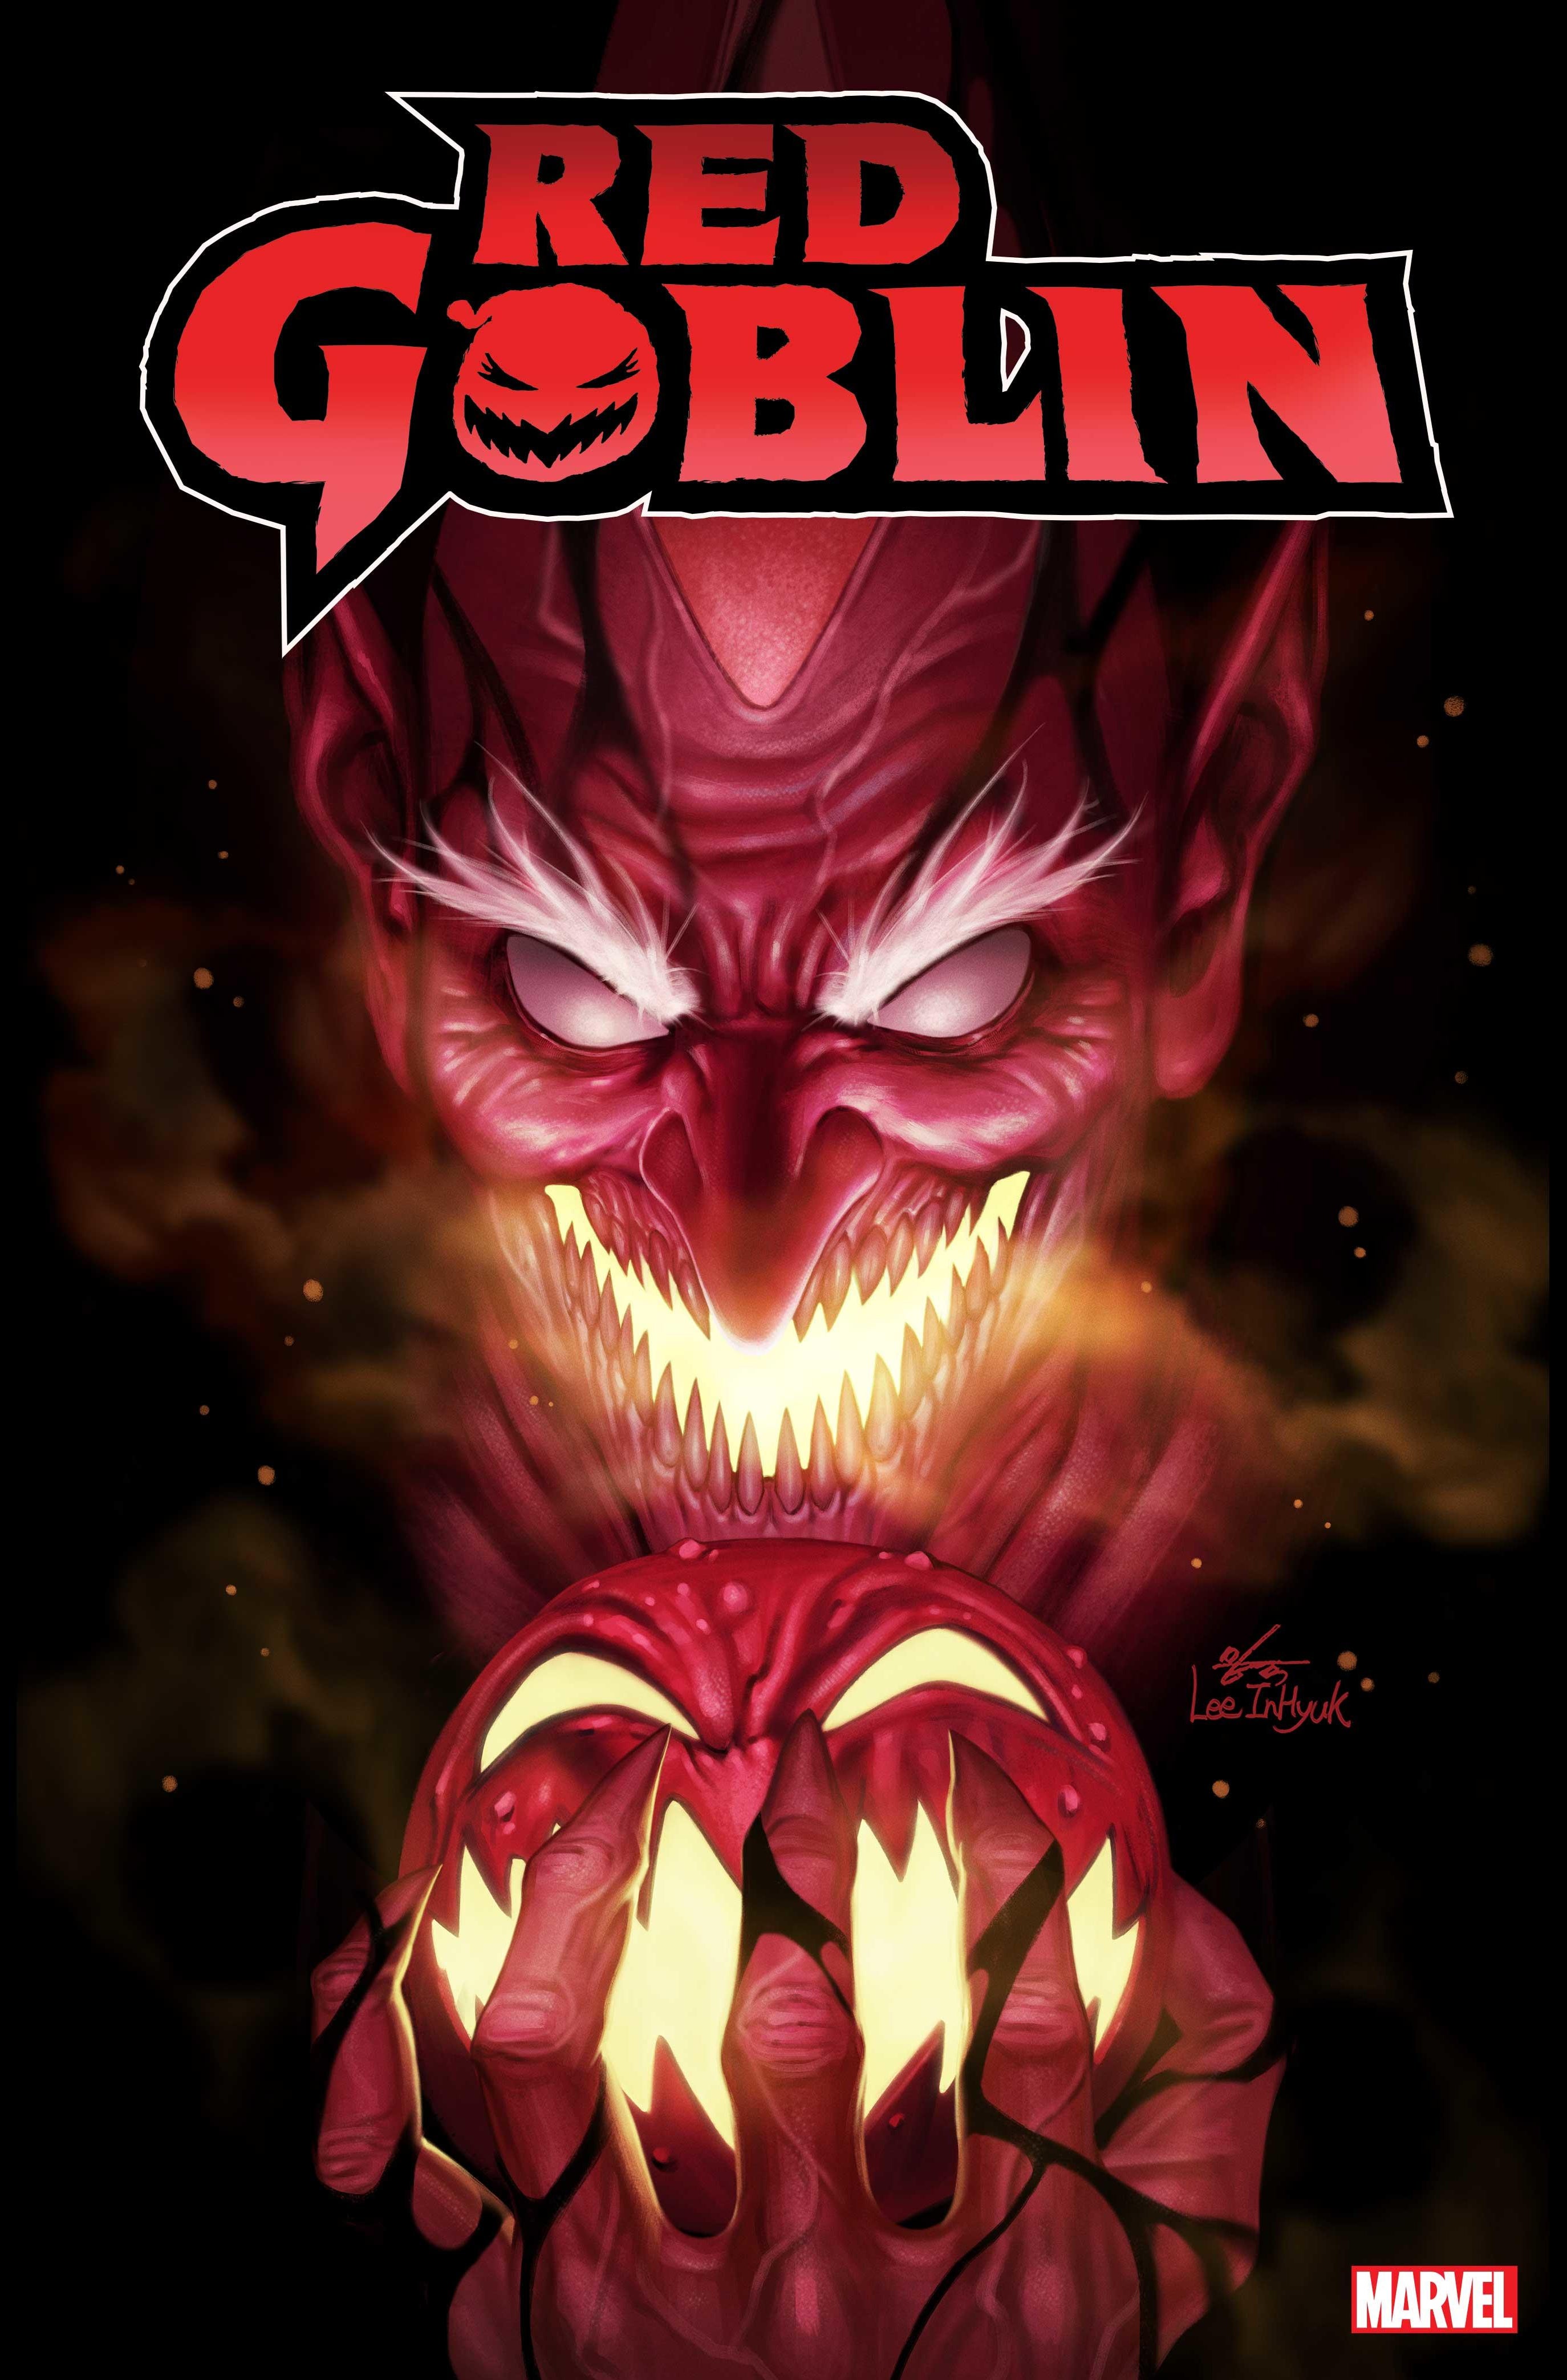 Spider-Man Villain Red Goblin Gets a New Host and Dark Web Spinoff Series